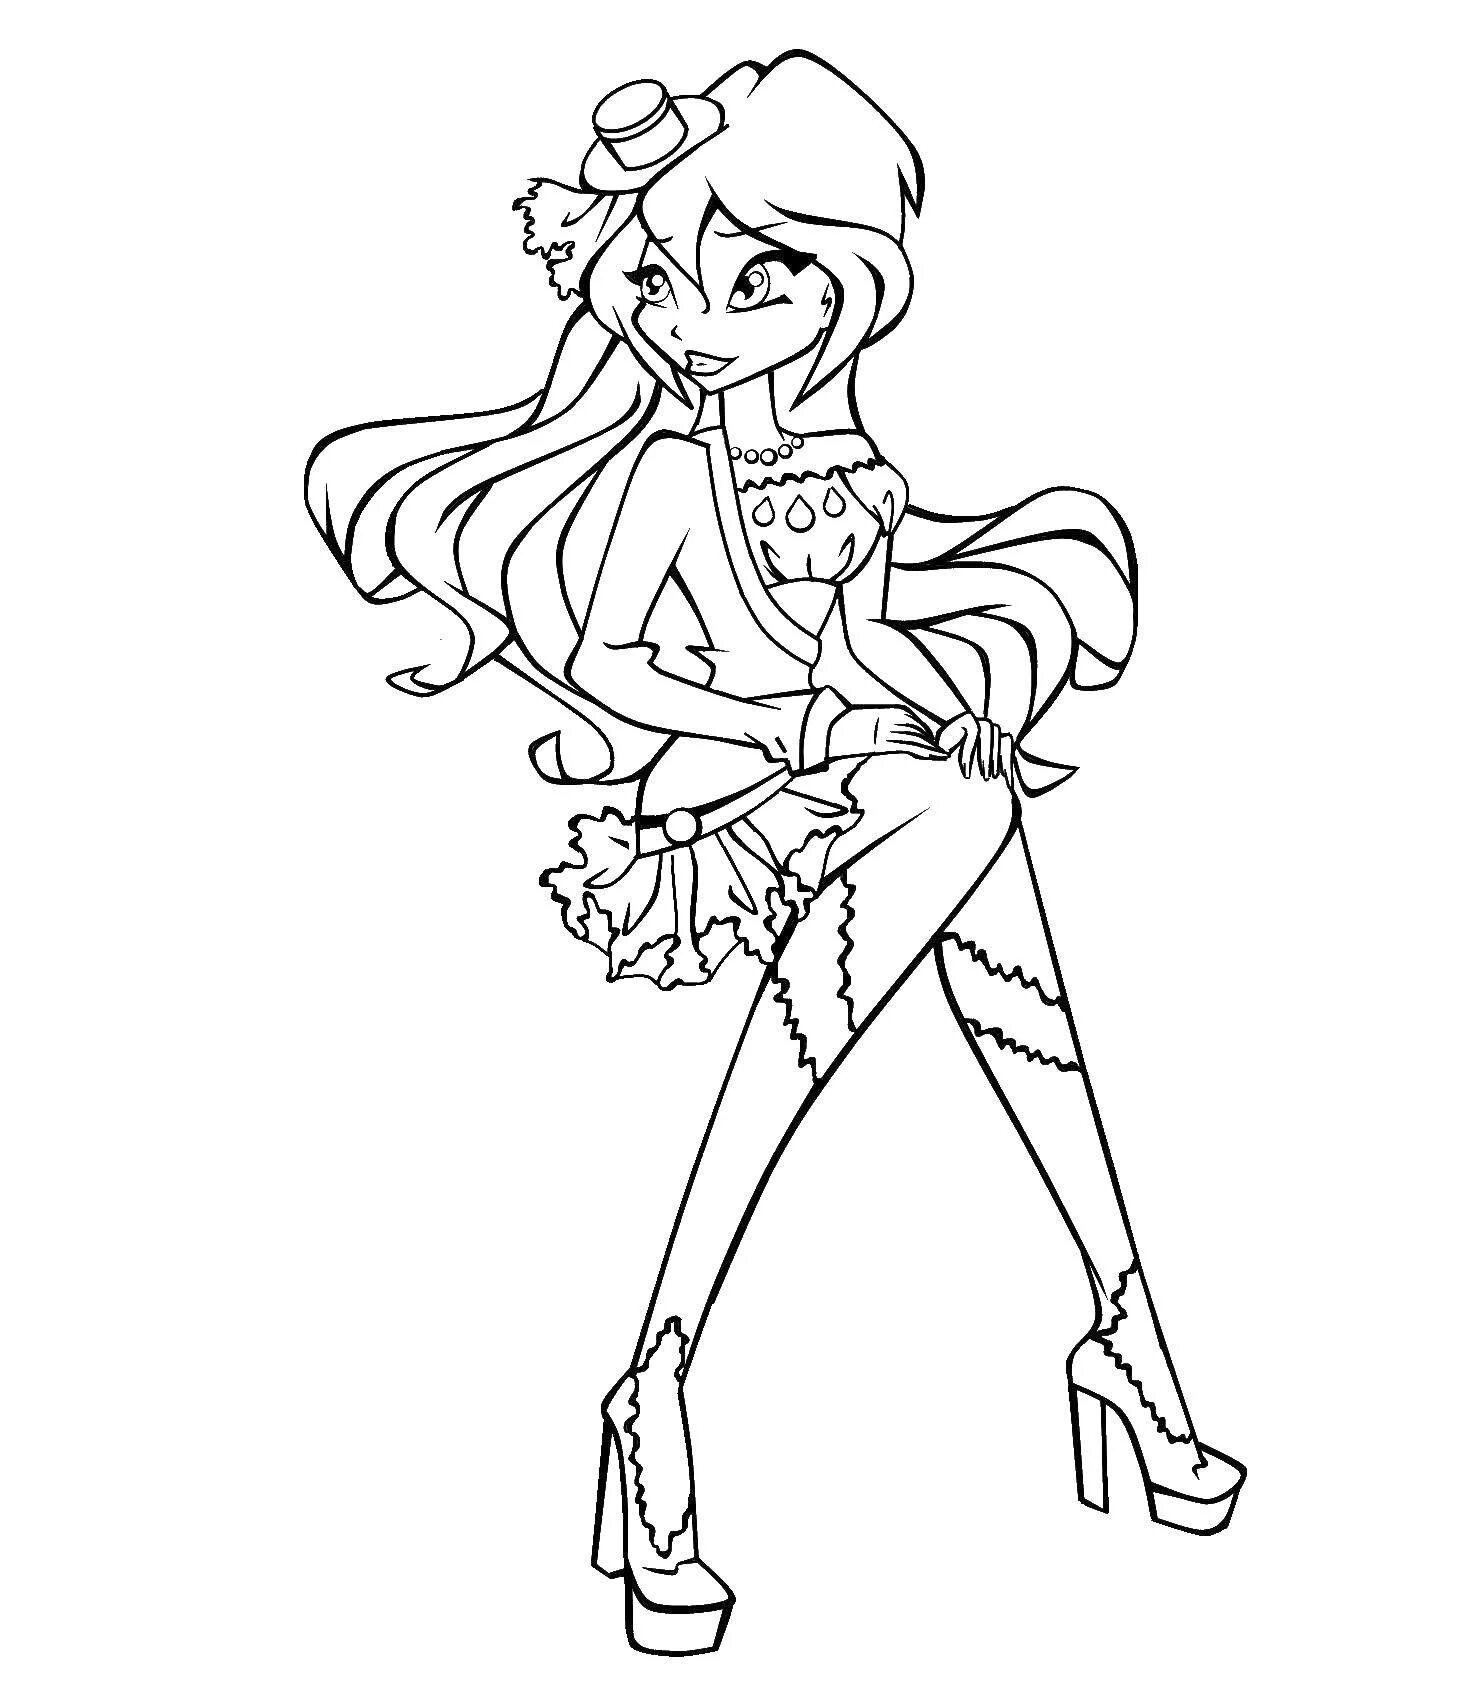 Winx glowing Daphne coloring book